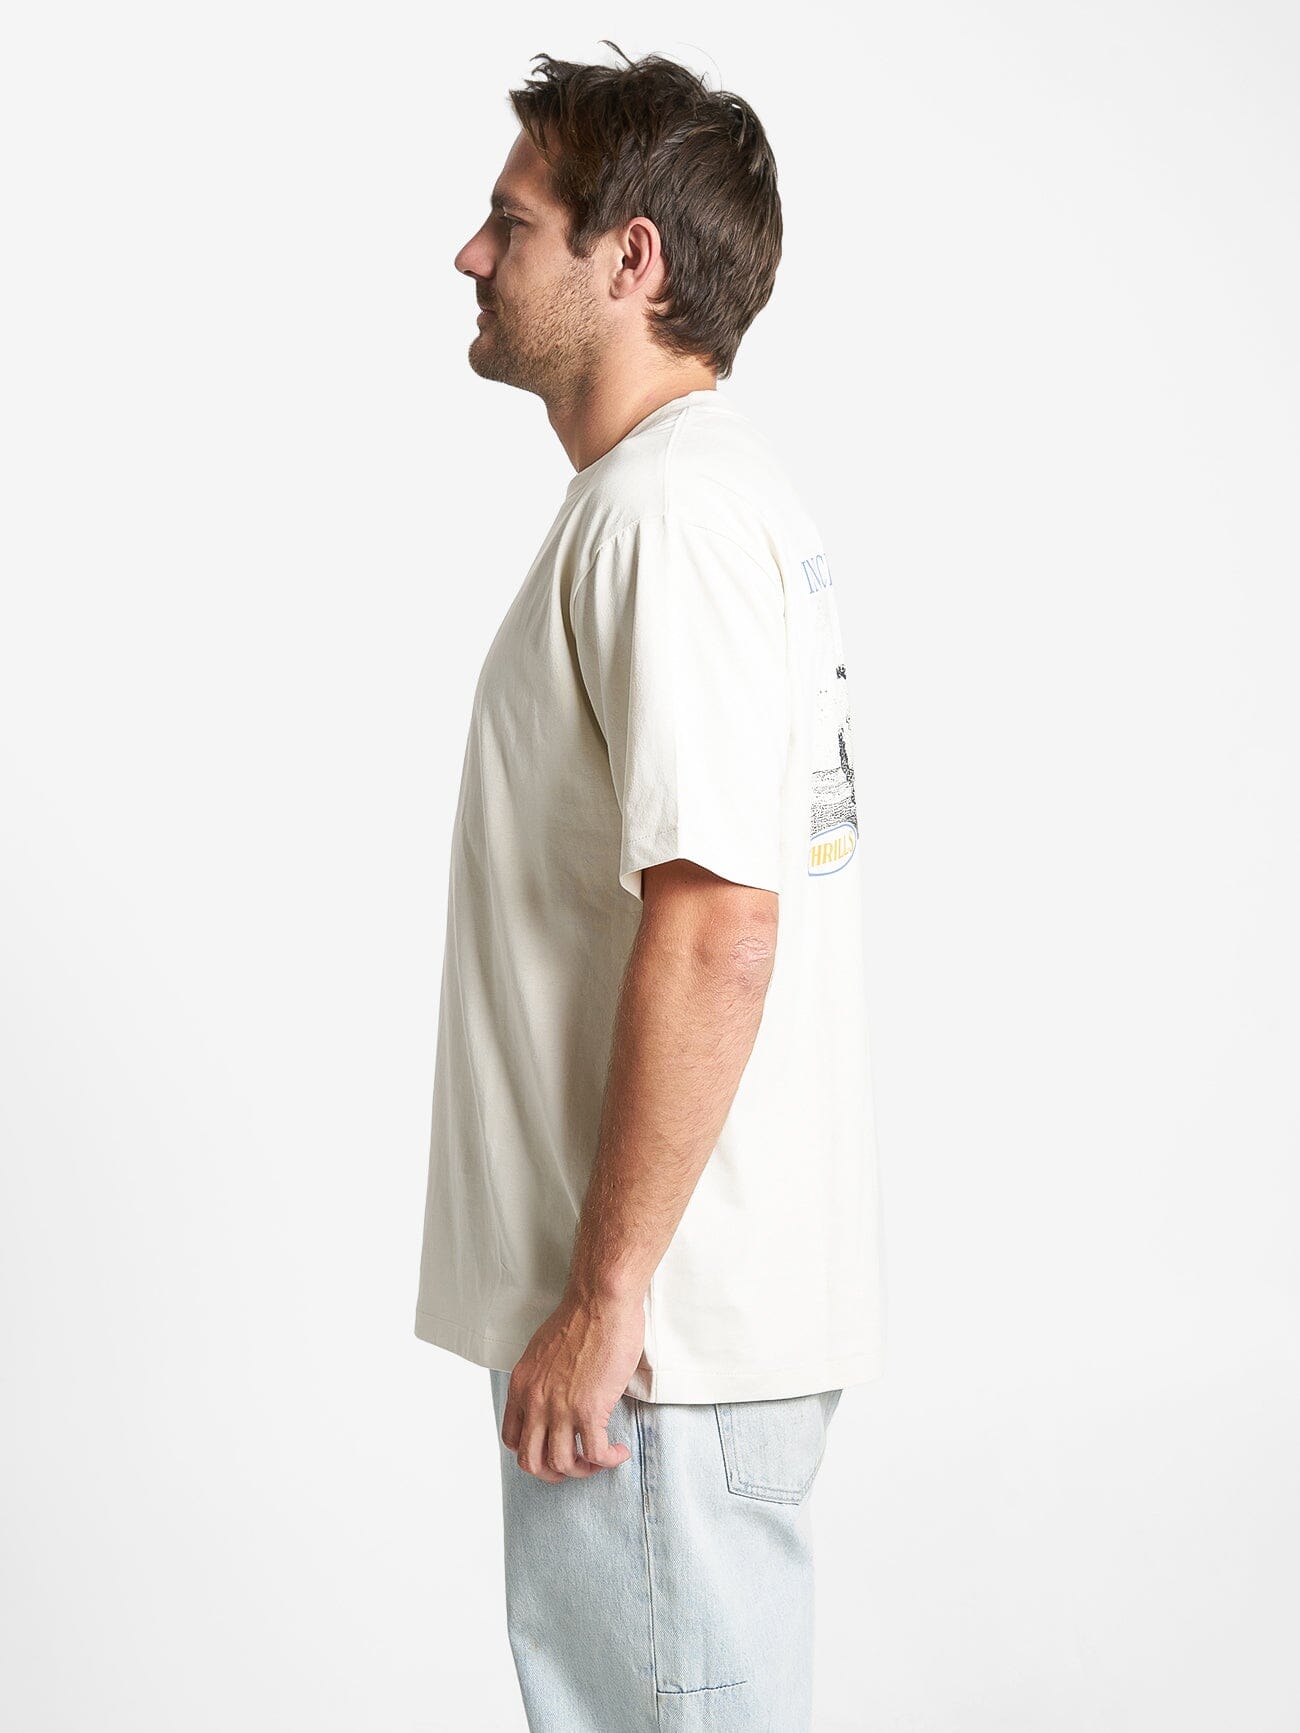 Increased Power Oversized Fit Tee - Heritage White